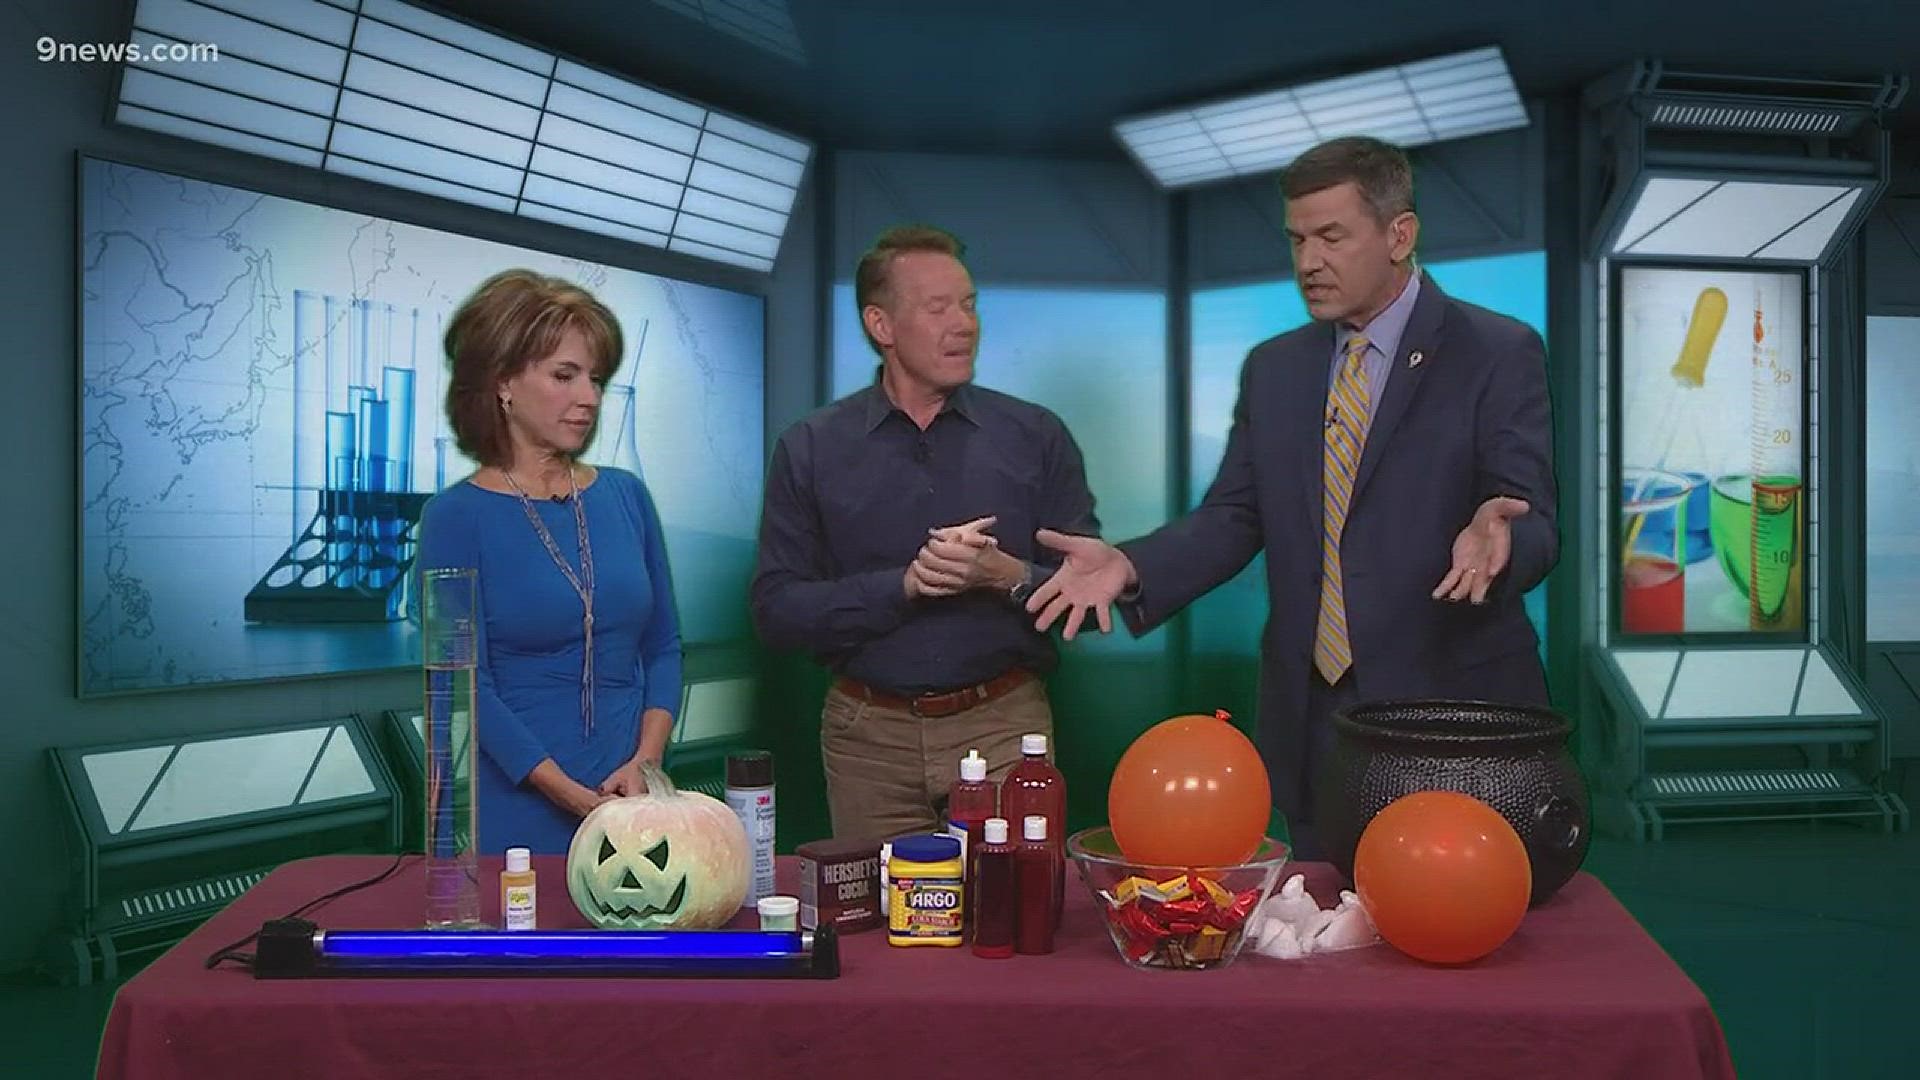 It's tough to pin down our science guy to just 5 ideas, but Steve Spangler has 5 amazing science ideas guaranteed to make your Halloween even more fun.